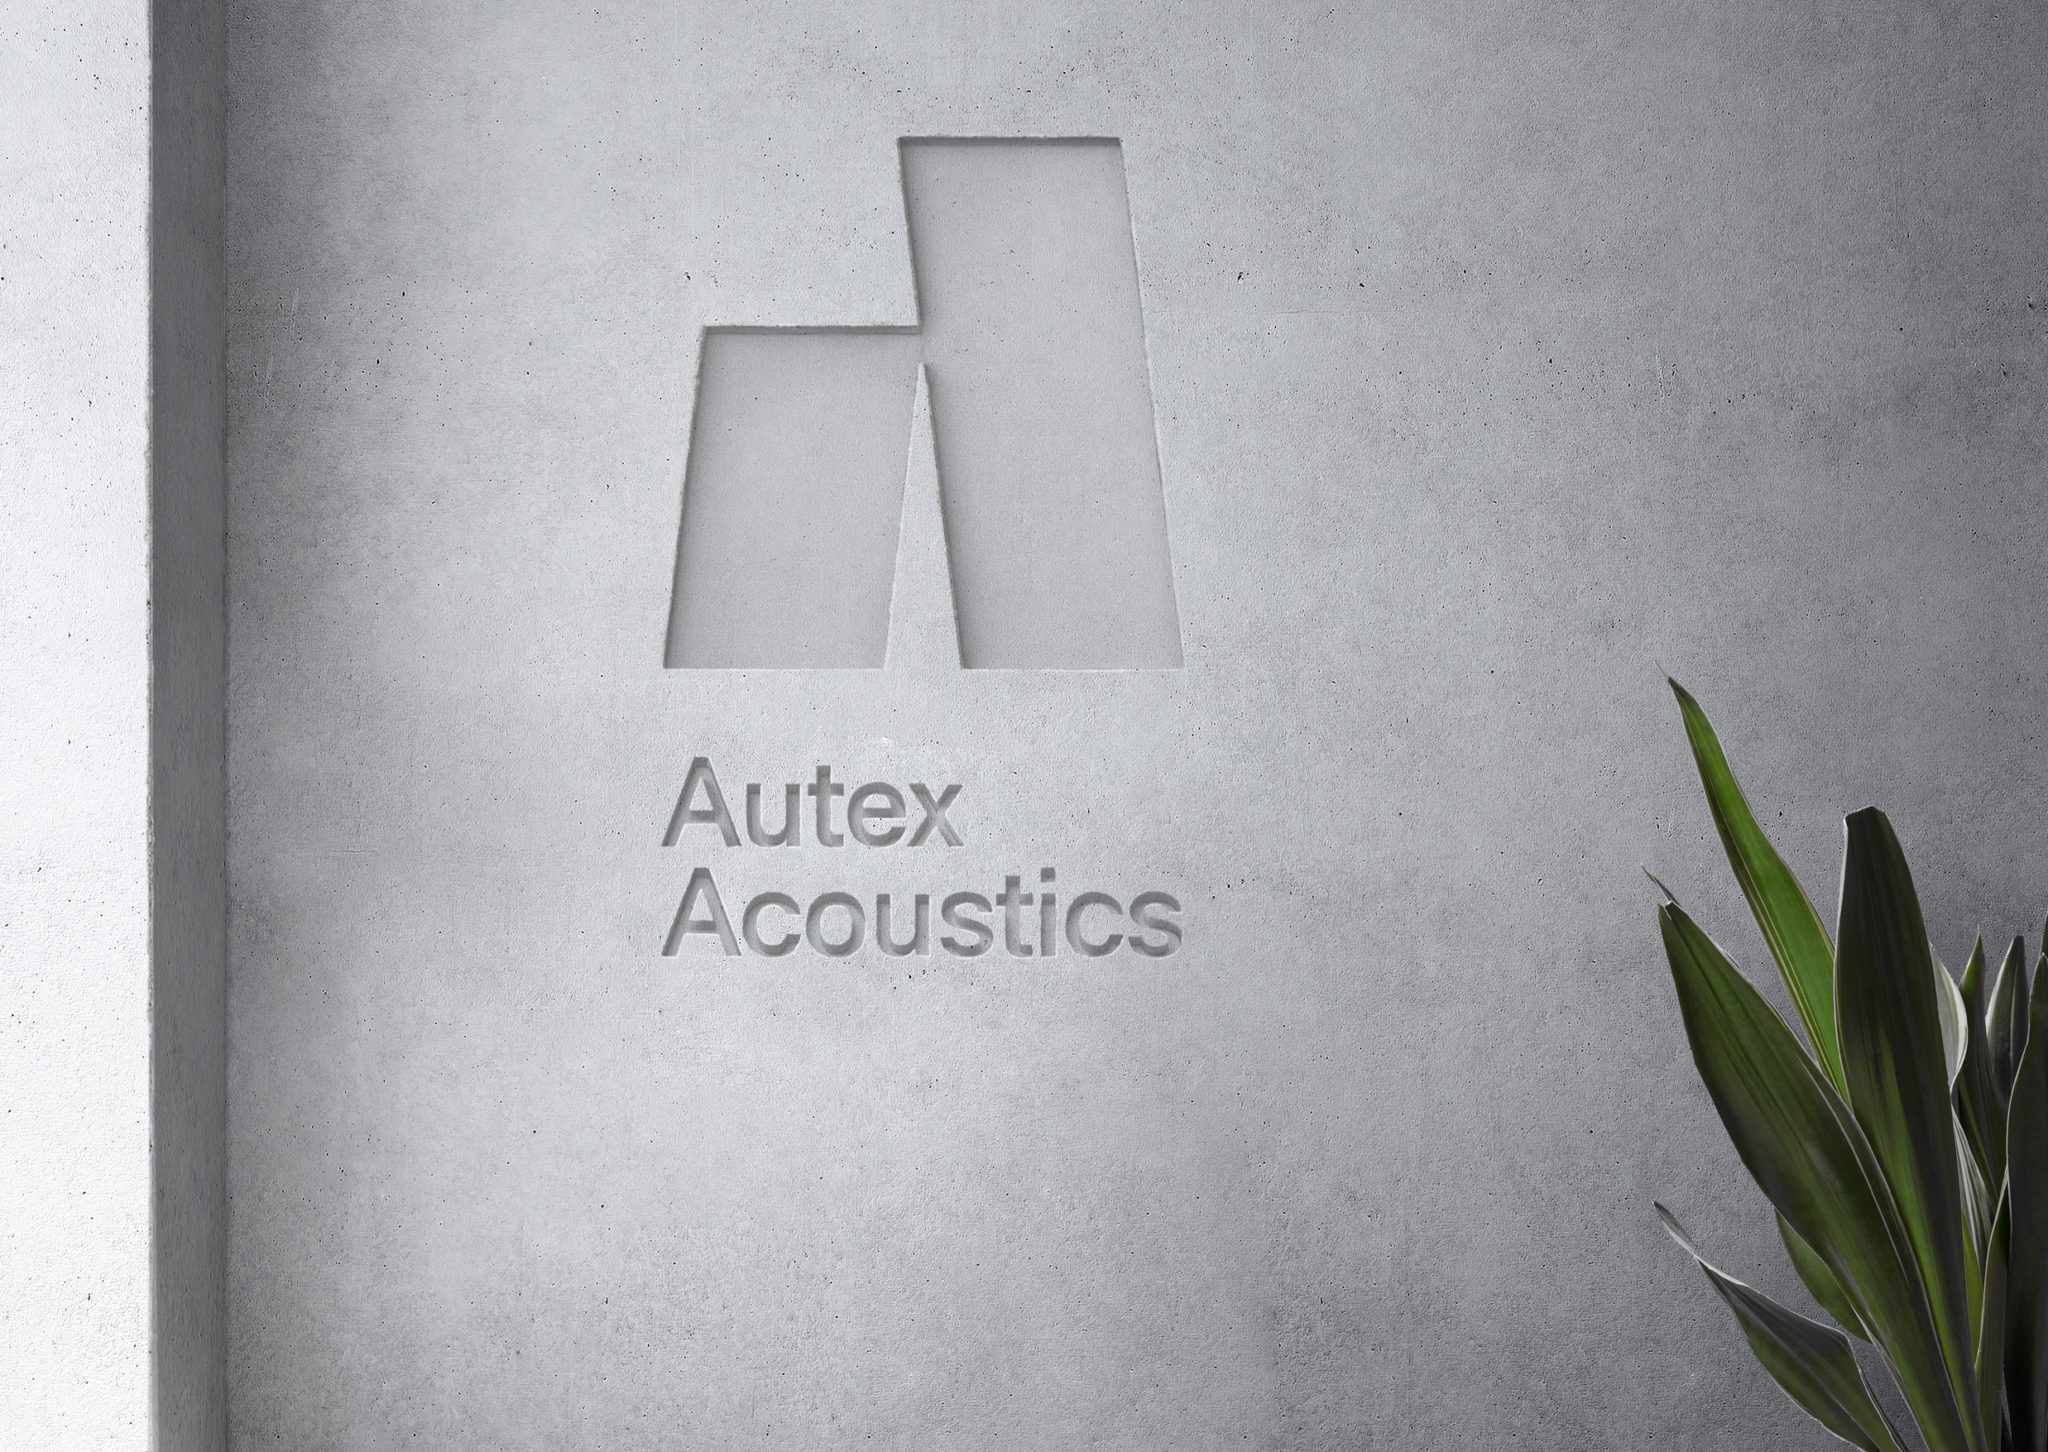 Logo and brand identity design for Autex Acoustics by Marx Design, New Zealand